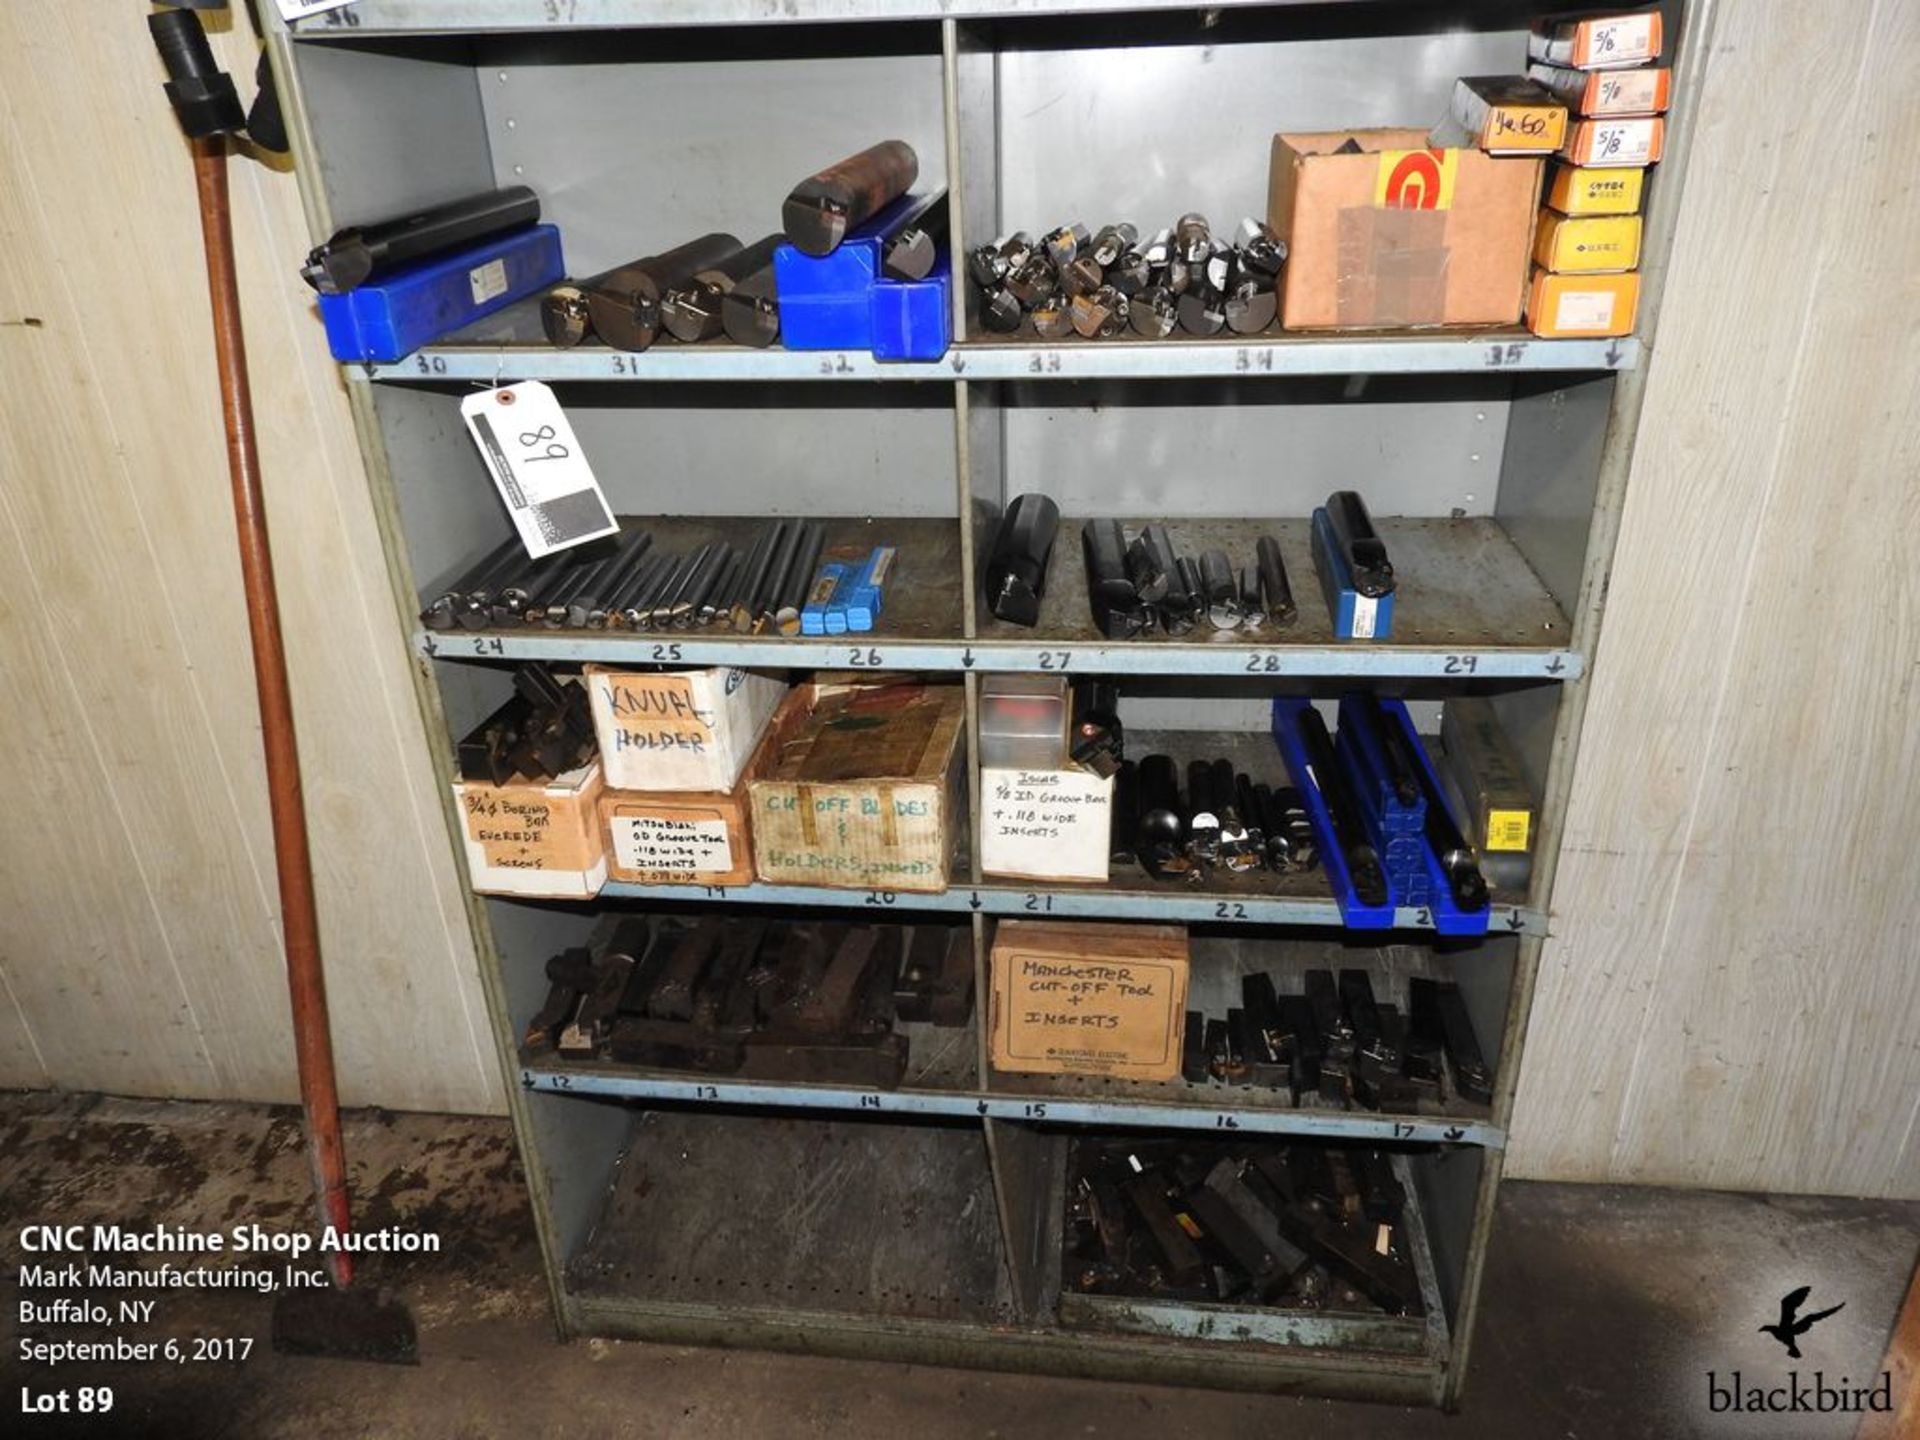 Lot- A lot of boring bars, tool holders in bottom of shelving